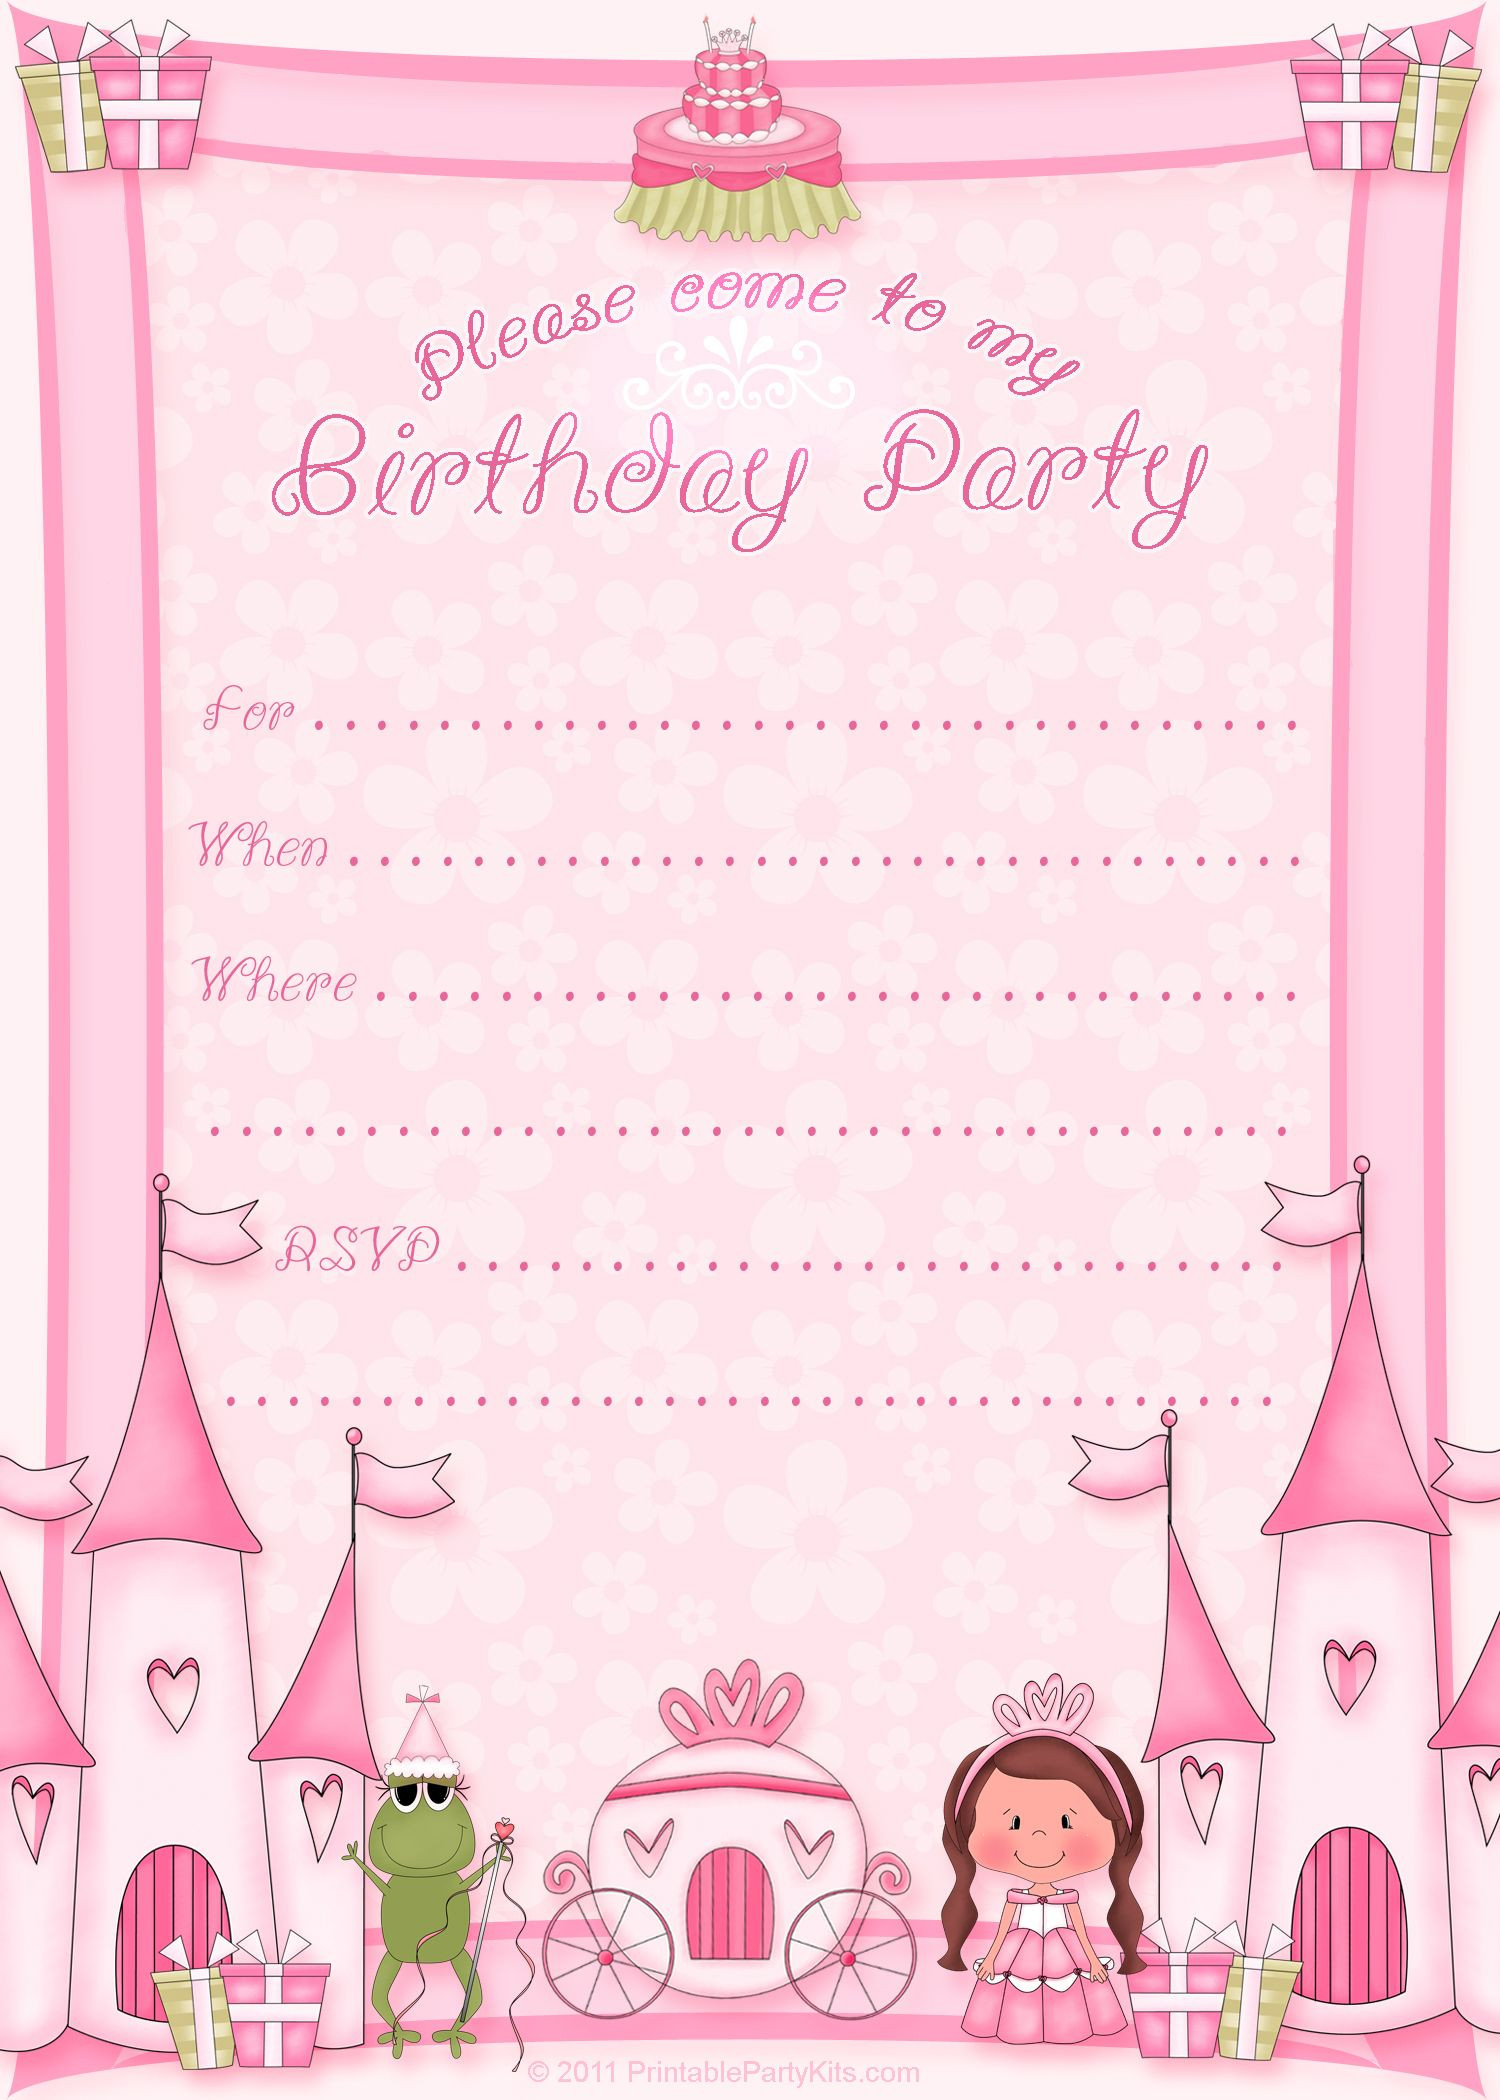 Free Online Birthday Party Invitations
 Free Printable Invitation Pinned for Kidfolio the